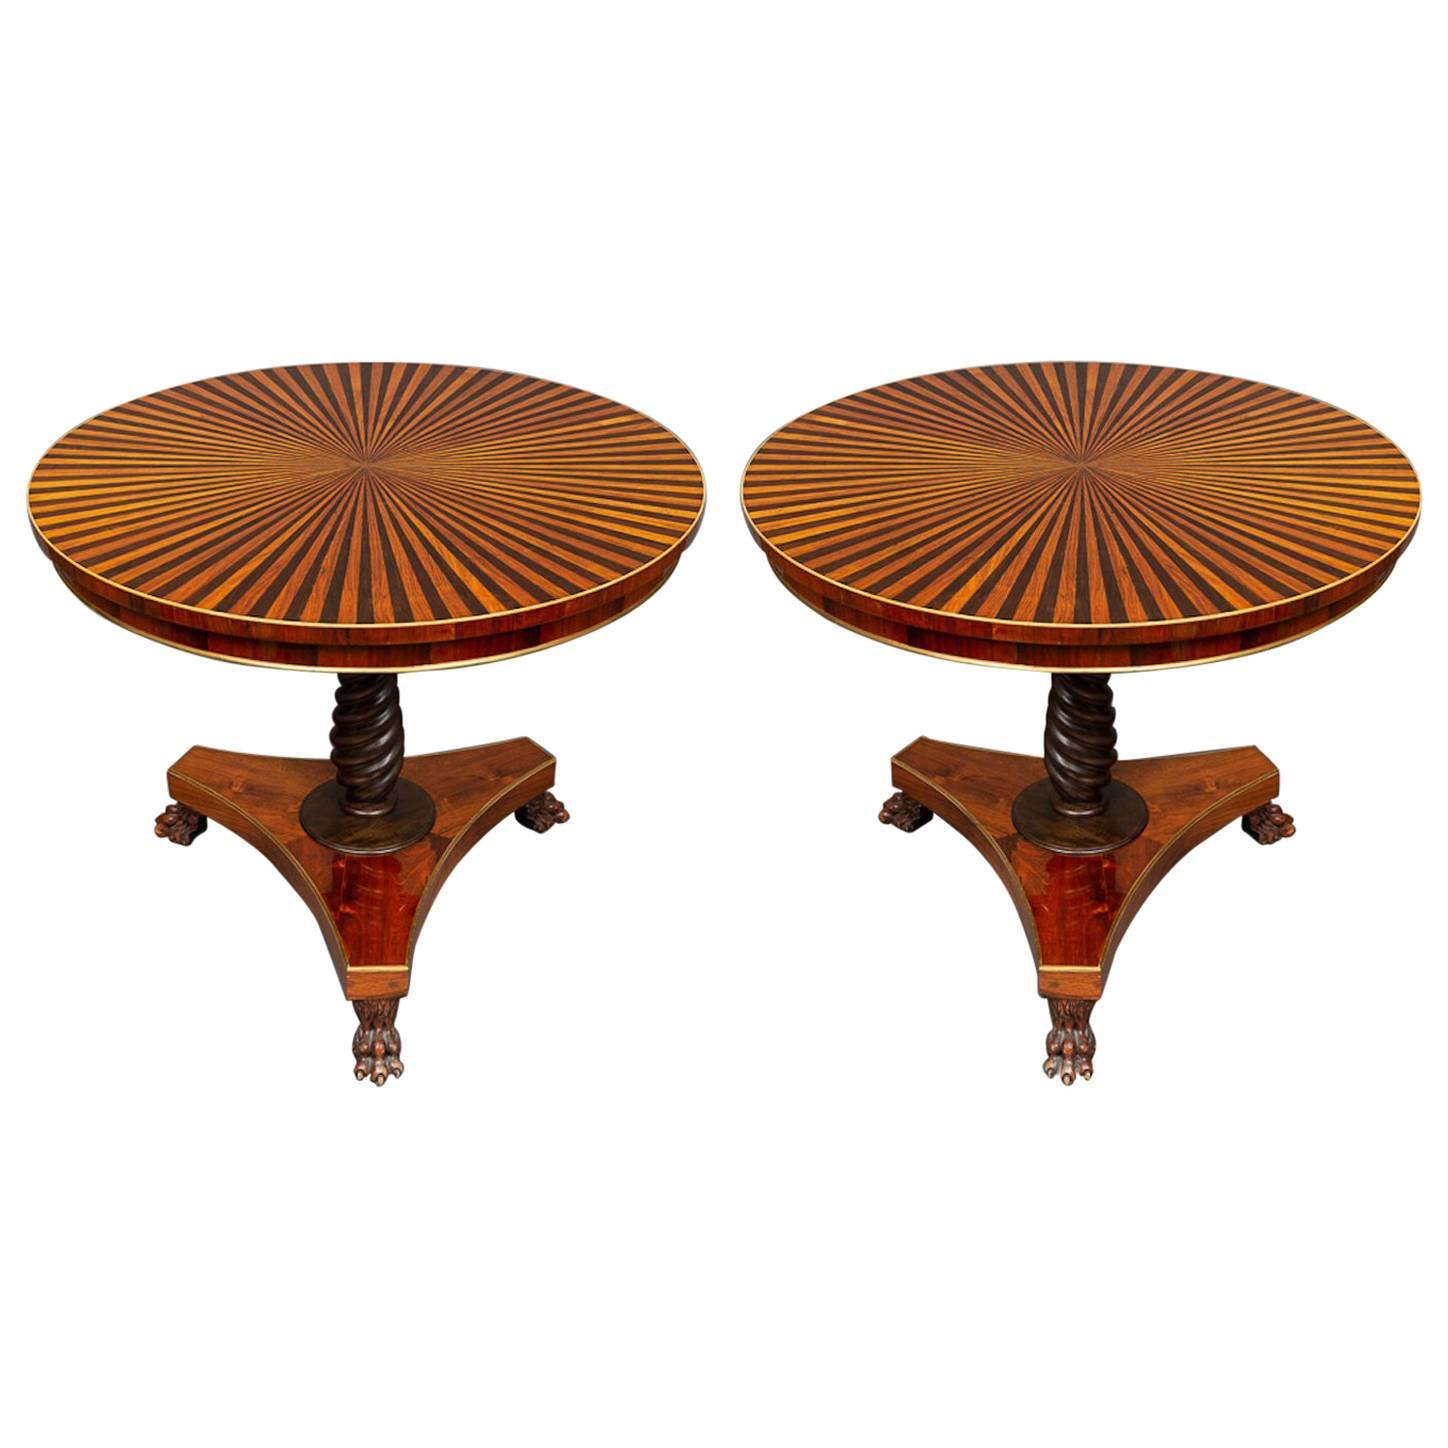 Pair of Regency-Style Parquetry Small Centre Tables